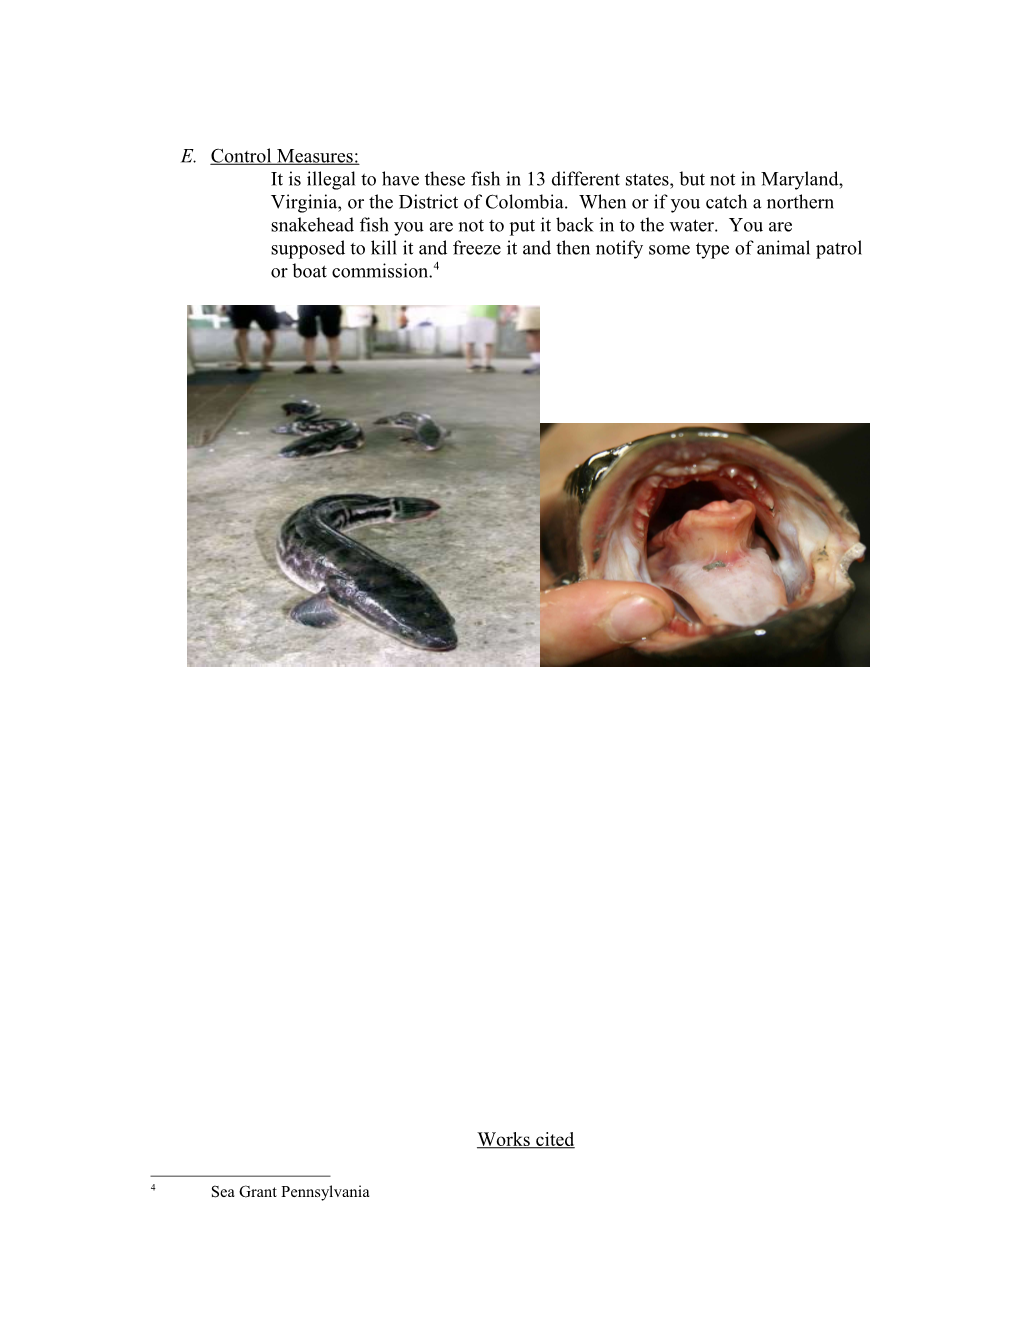 The Northern Snakehead